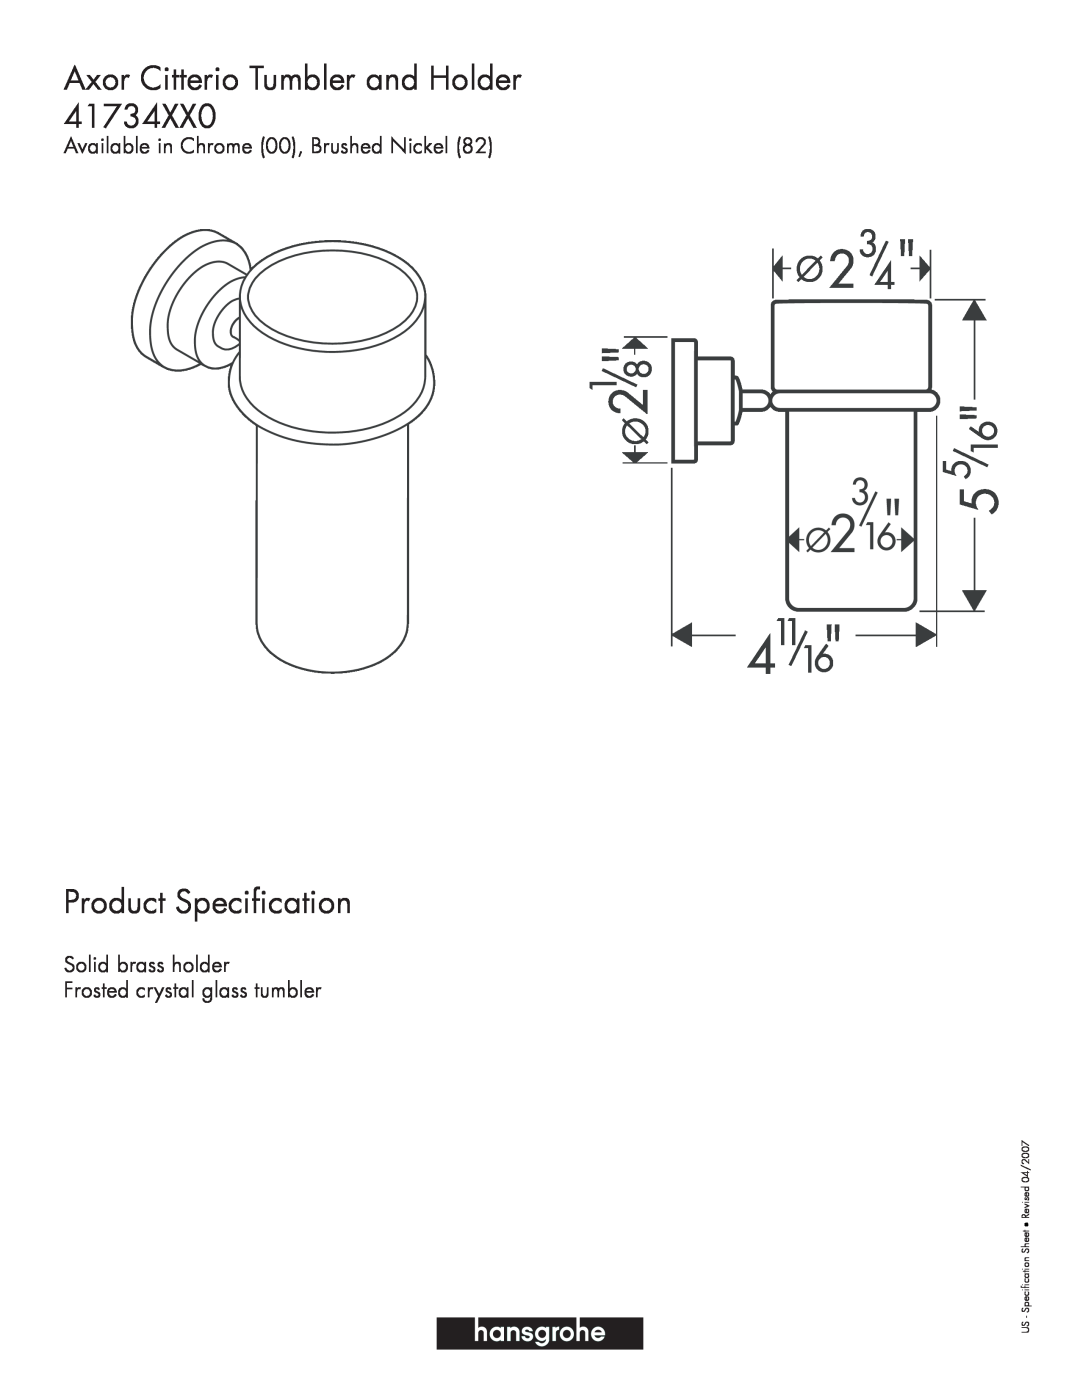 Axor 41734XX0 specifications Axor Citterio Tumbler and Holder, Product Specification 